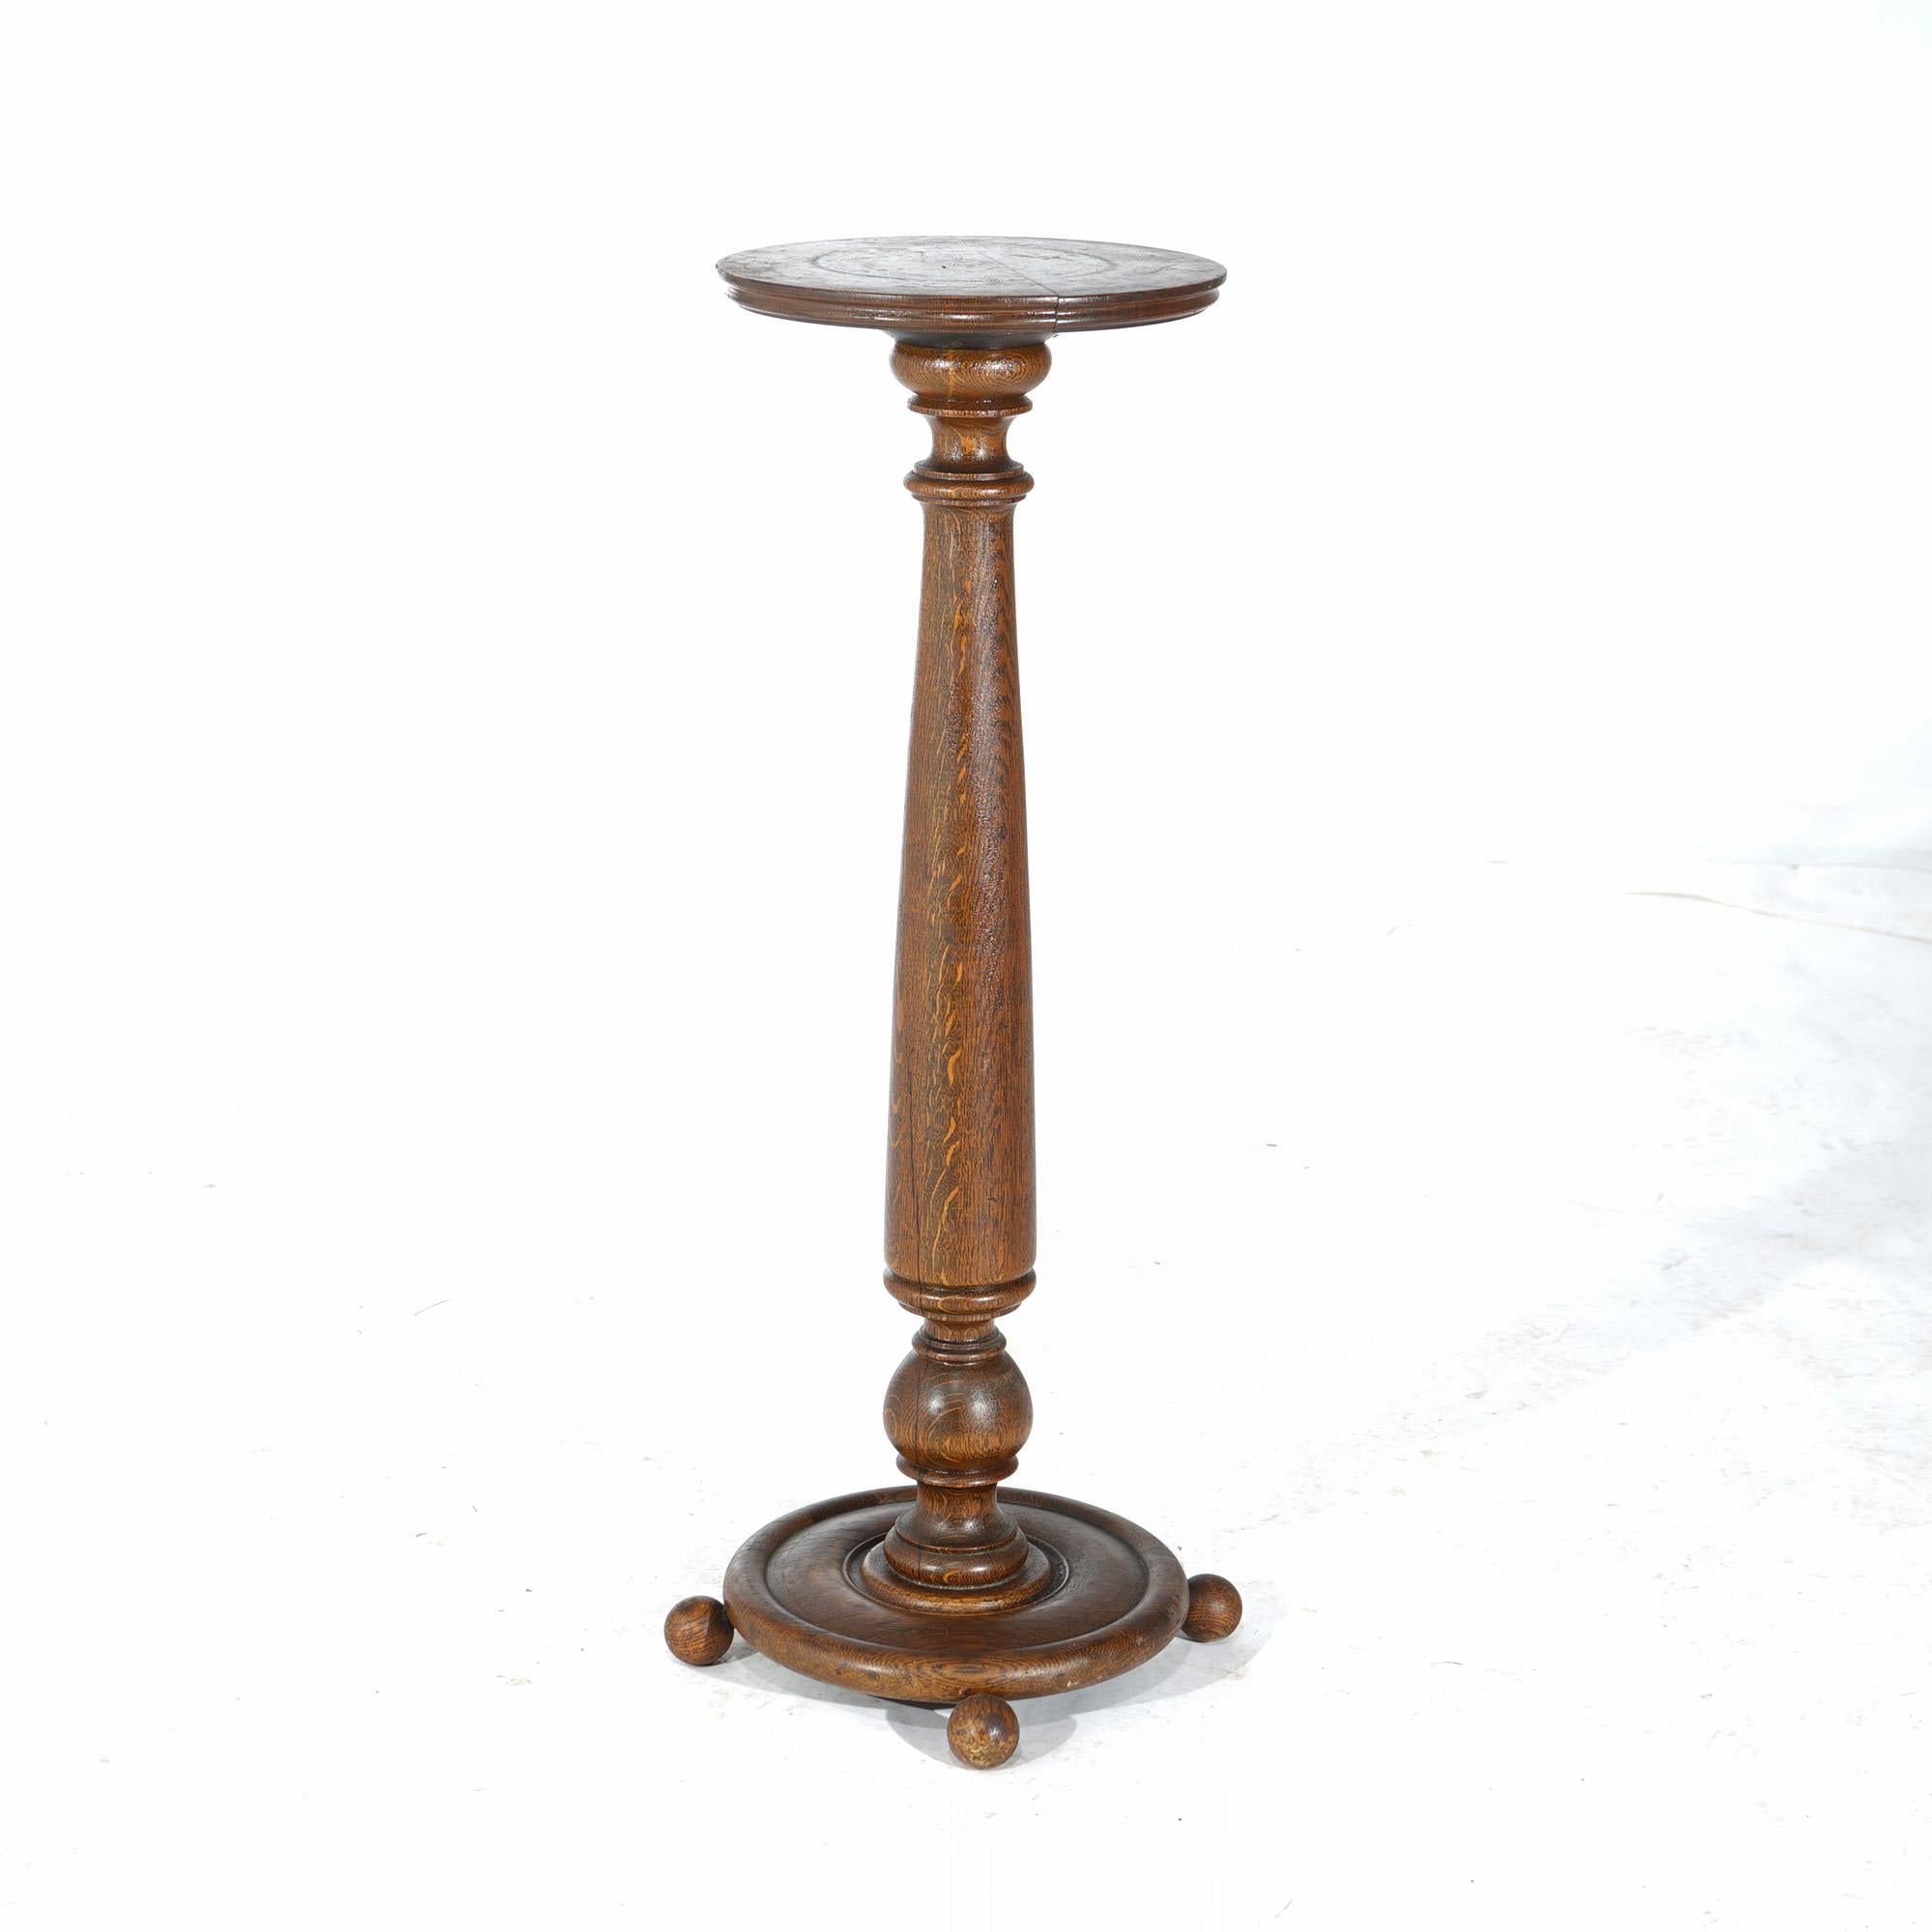 ***Ask About Discounted In-House Shipping***
An antique Arts and Crafts pedestal offers quarter sawn oak construction with circular display over turned and flared column, raised on circular base with ball feet, c1900

Measures - 35.5